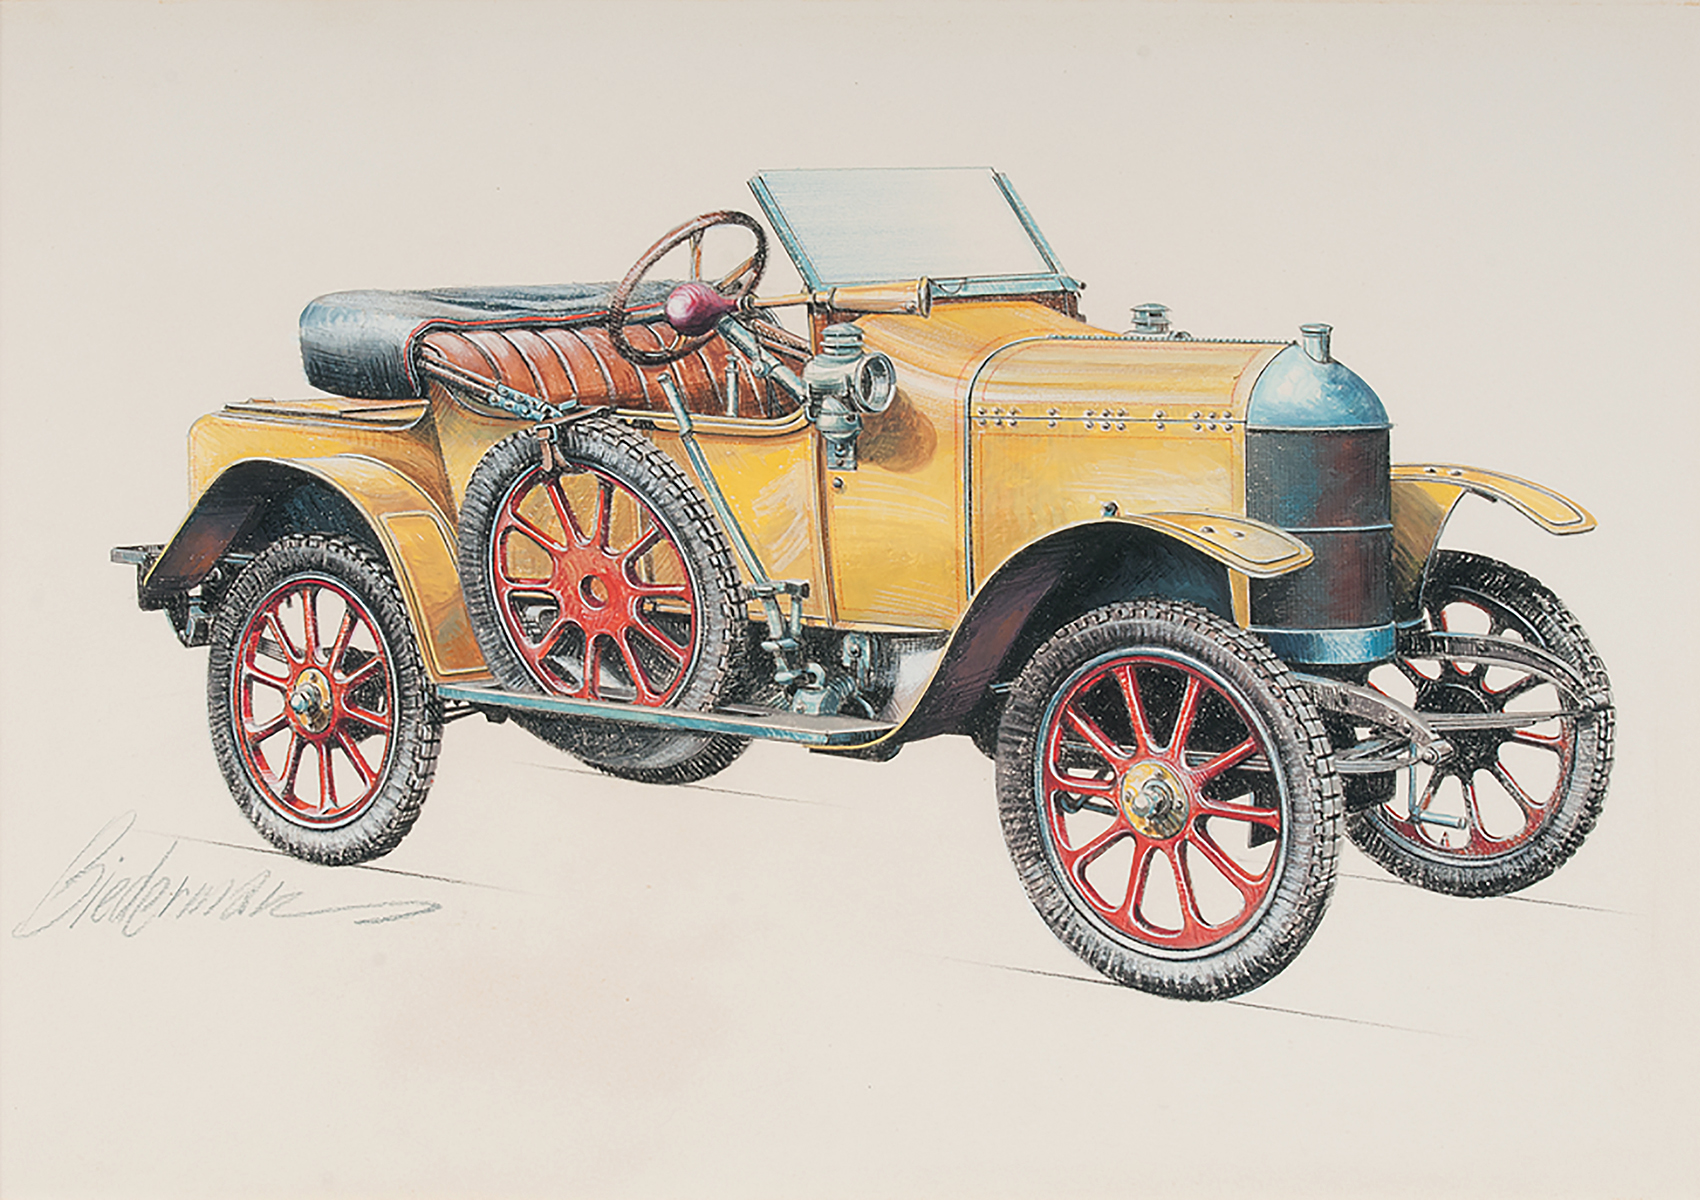 1913 Morris Oxford ‘Bullnose’ Runabout: Illustrated by Jerome D. Biederman